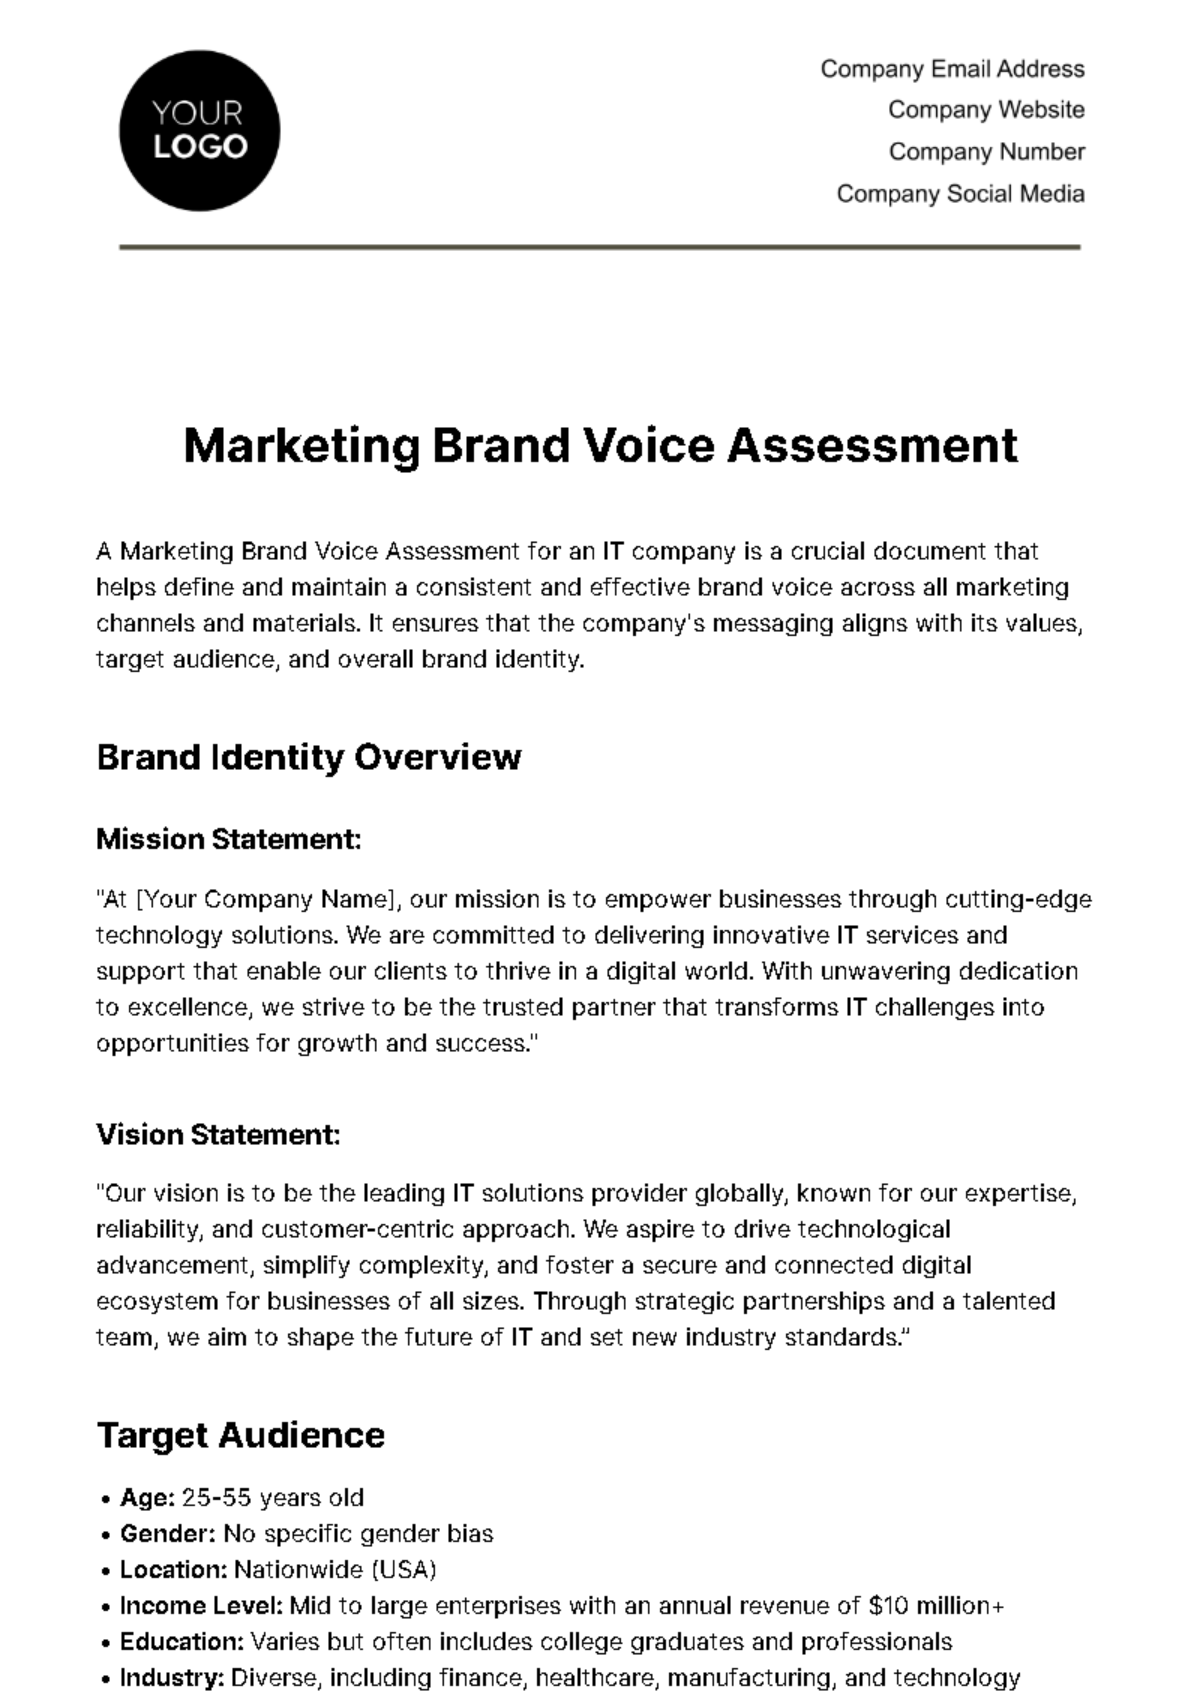 Free Marketing Brand Voice Assessment Template